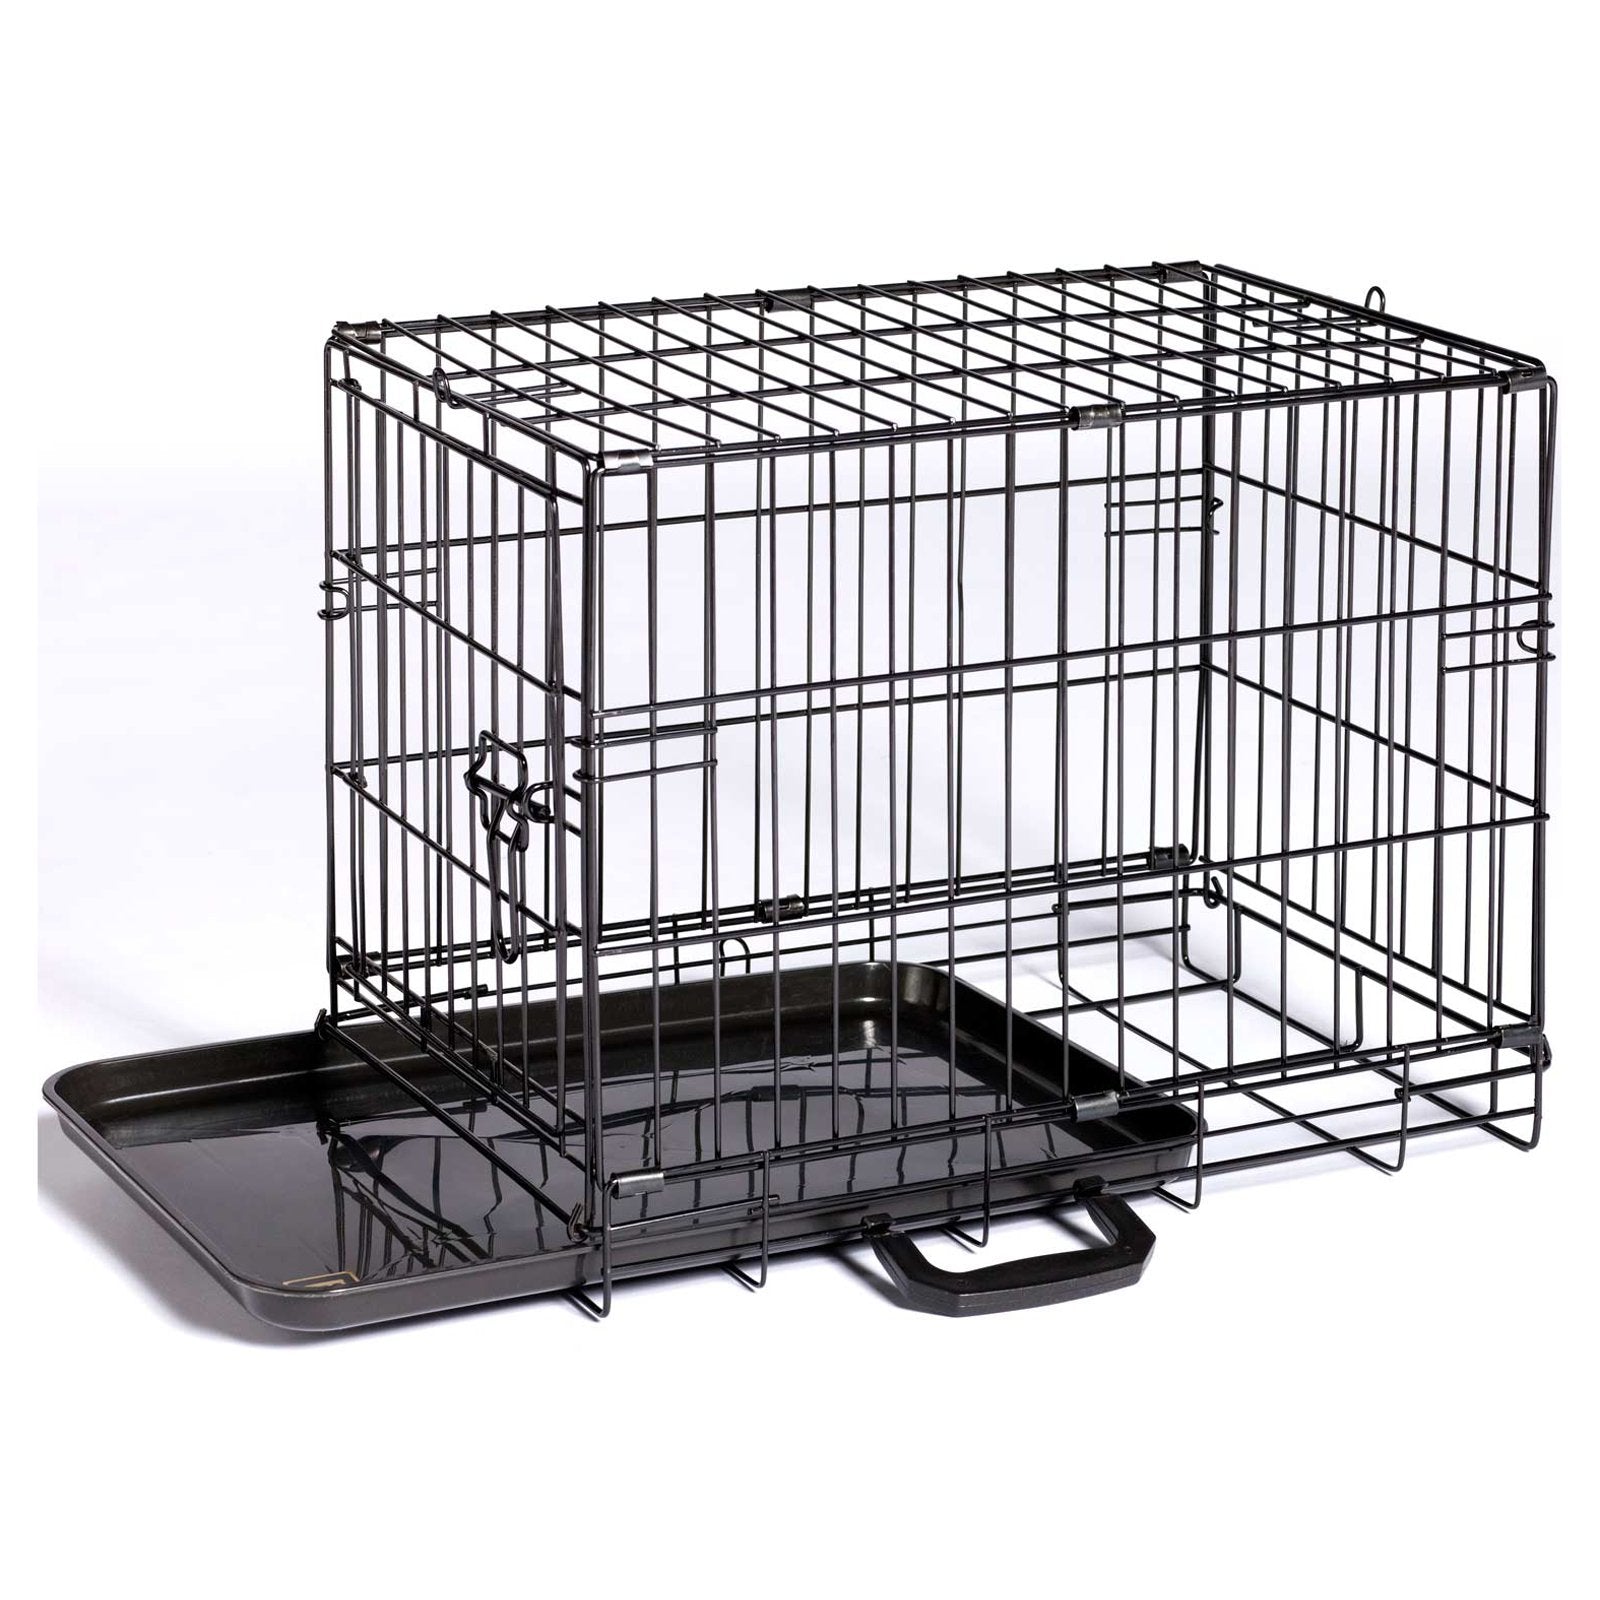 Prevue Pet Products Folding Dog Crate， Black， Small， 30.50